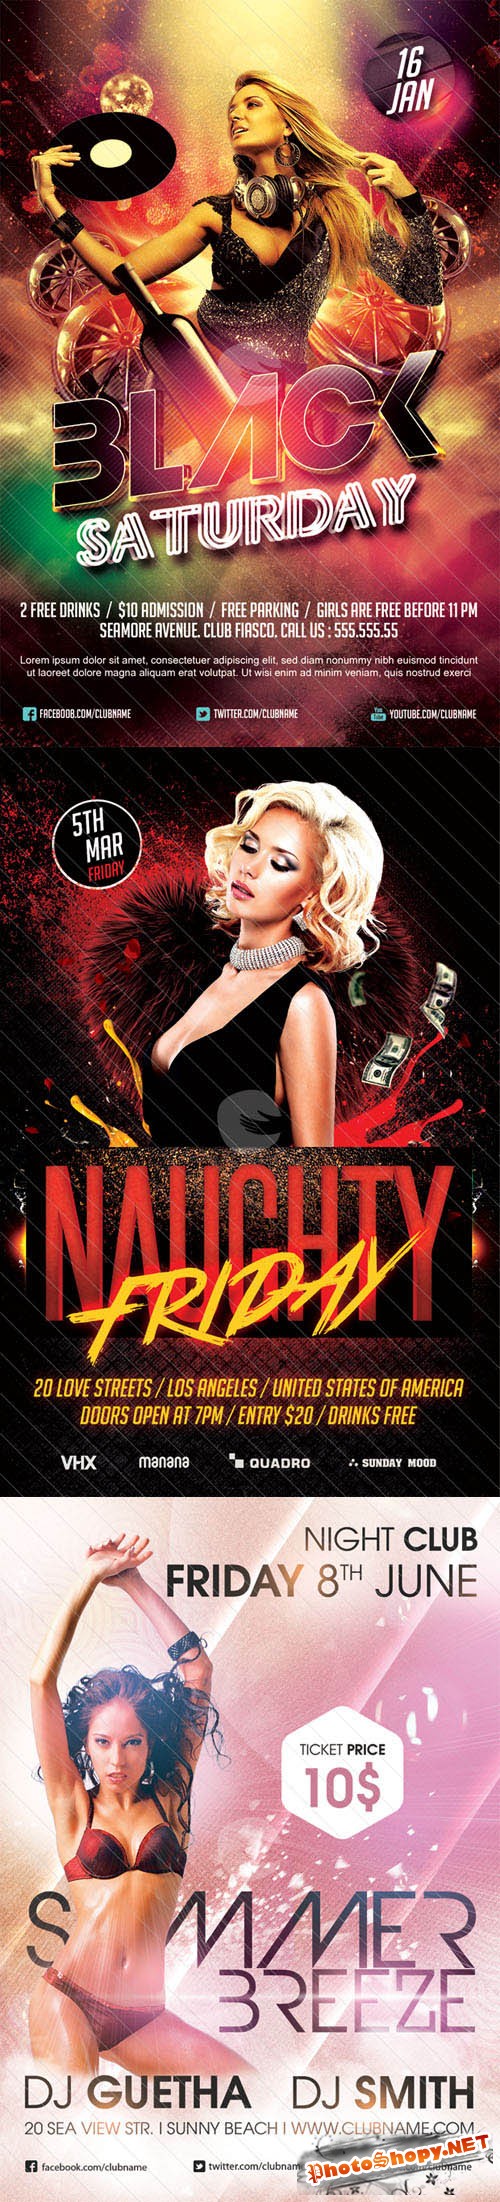 3 Night Club Party Flyer PSD Templates